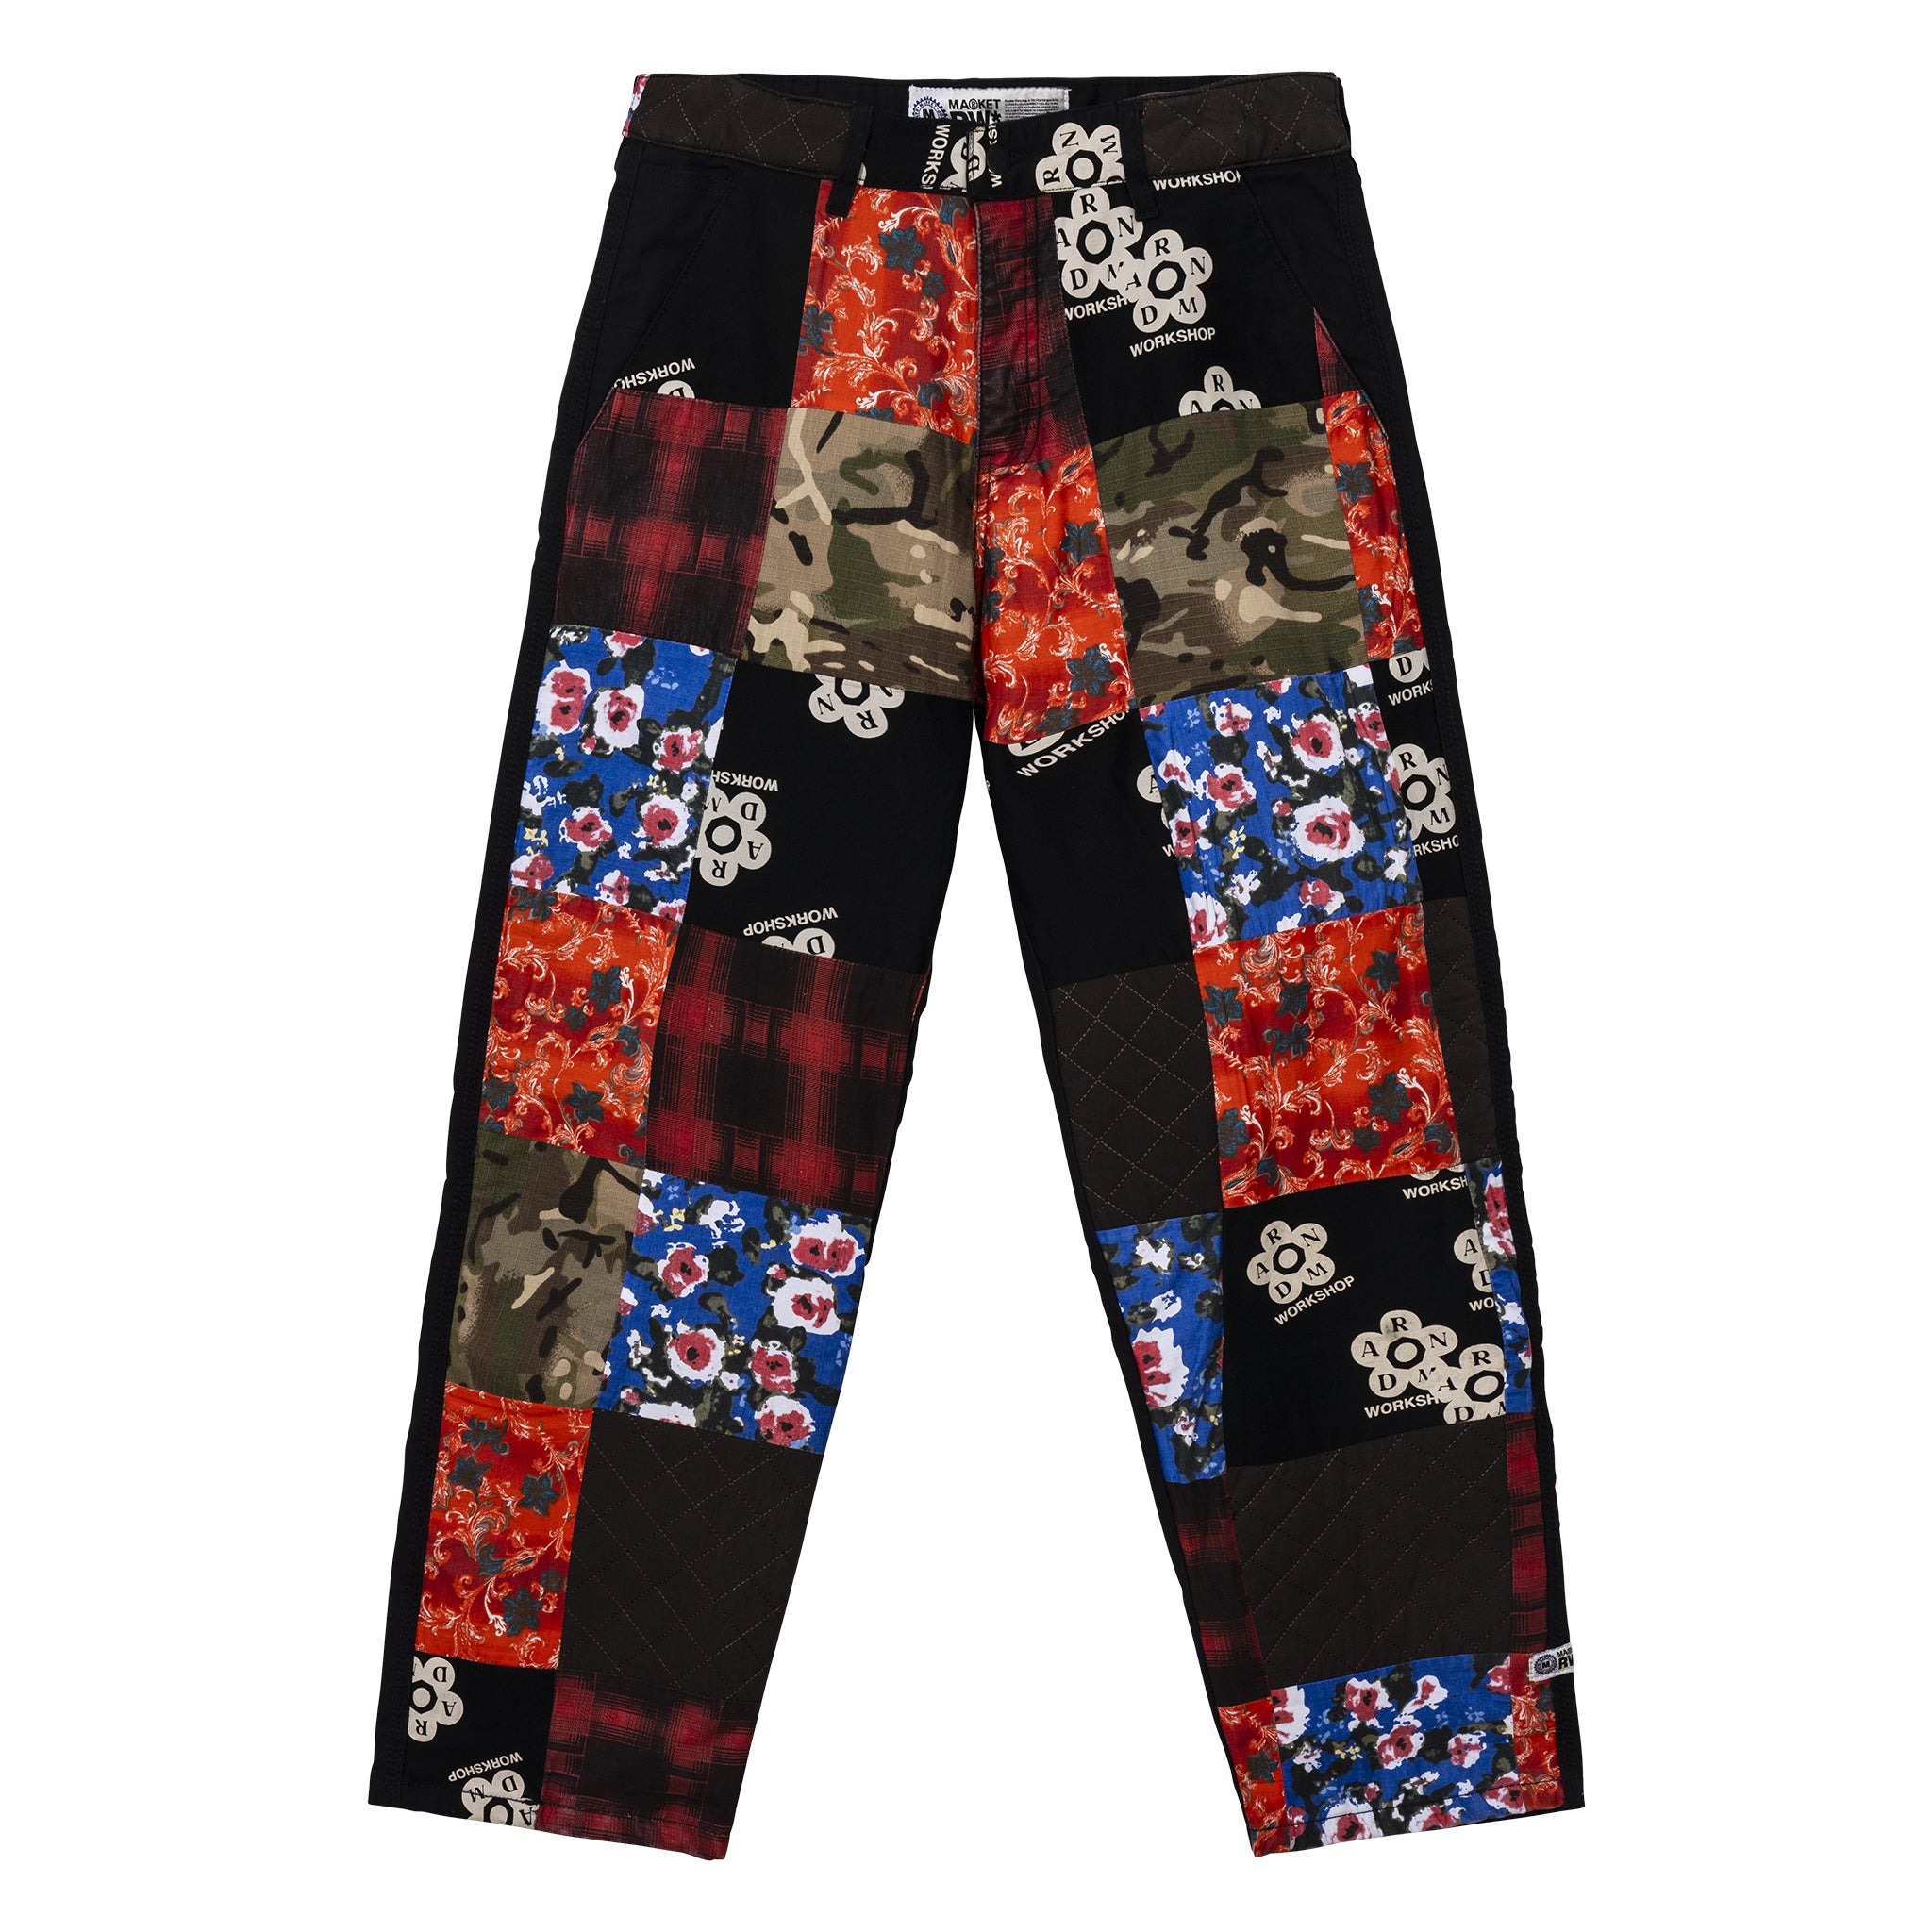 PURCHASE THE RW COLORADO QUILTED PANTS ONLINE | MARKET STUDIOS – Market